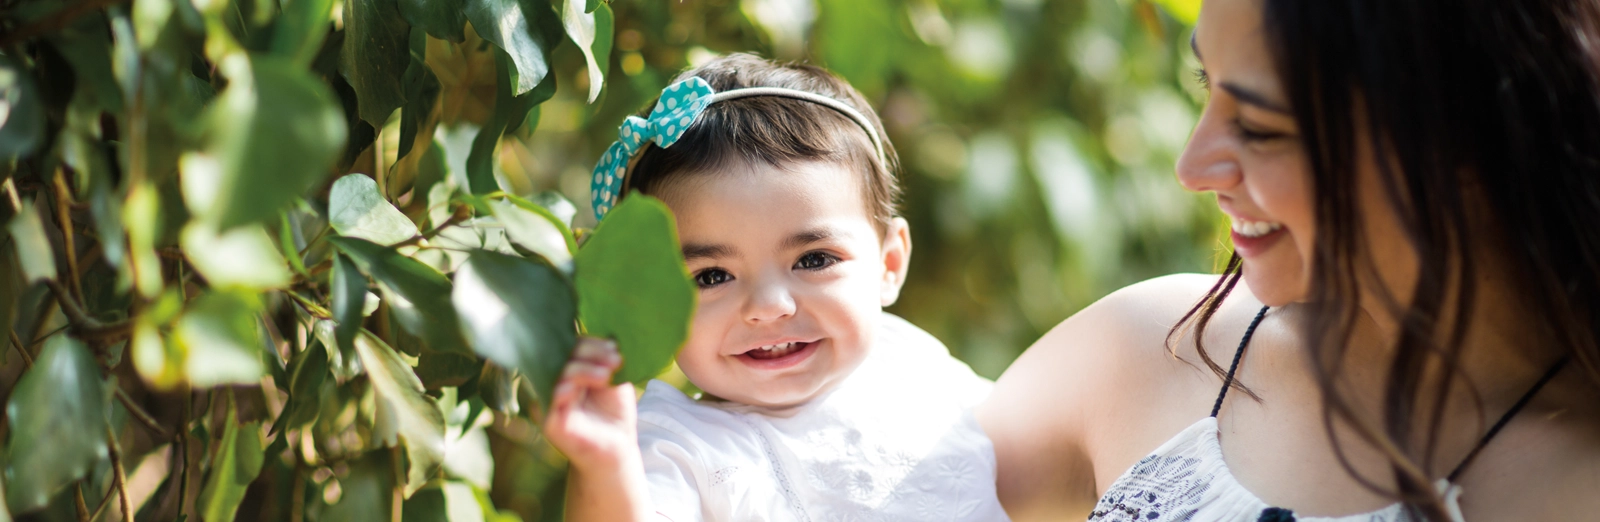 woman-and-baby-smiling-outside-1600x522.webp